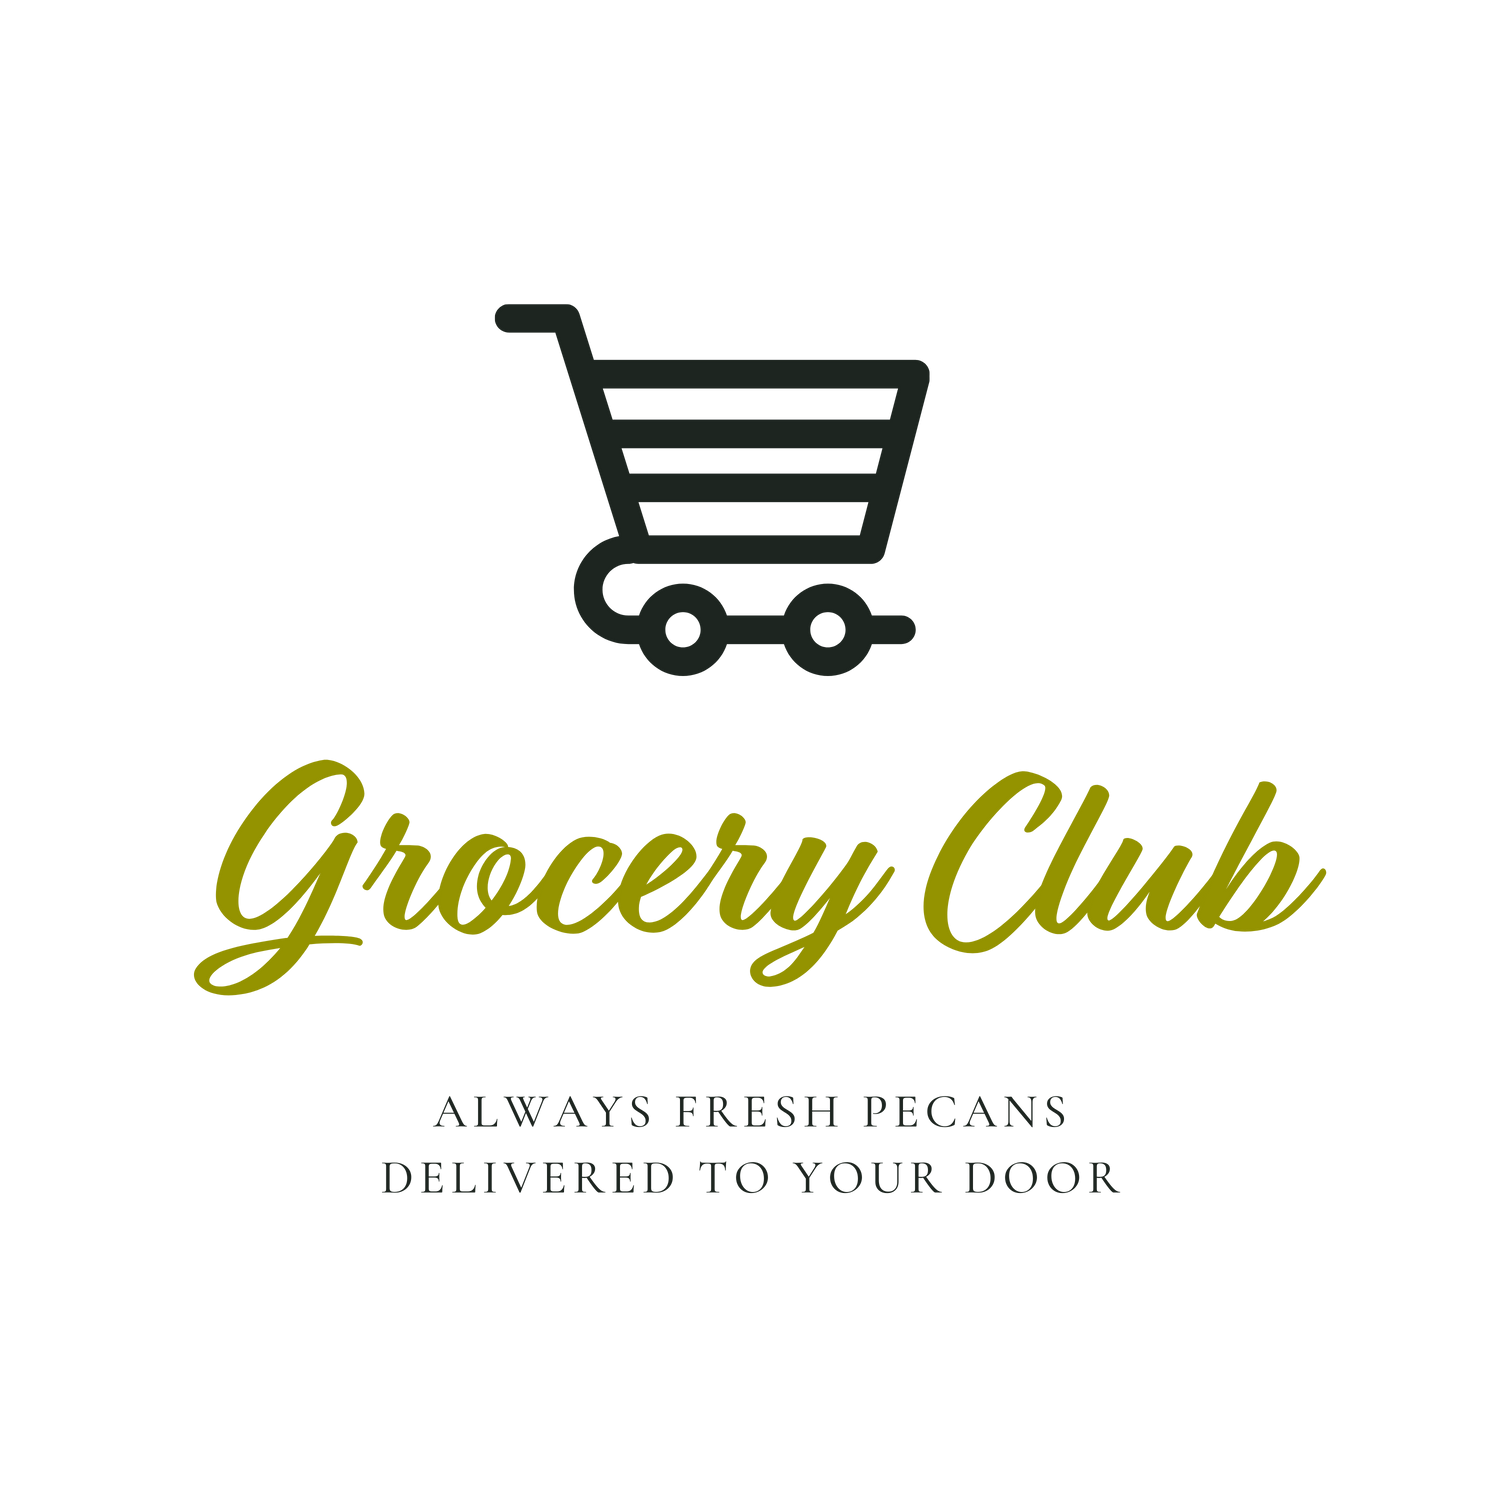 What is Grocery Club?